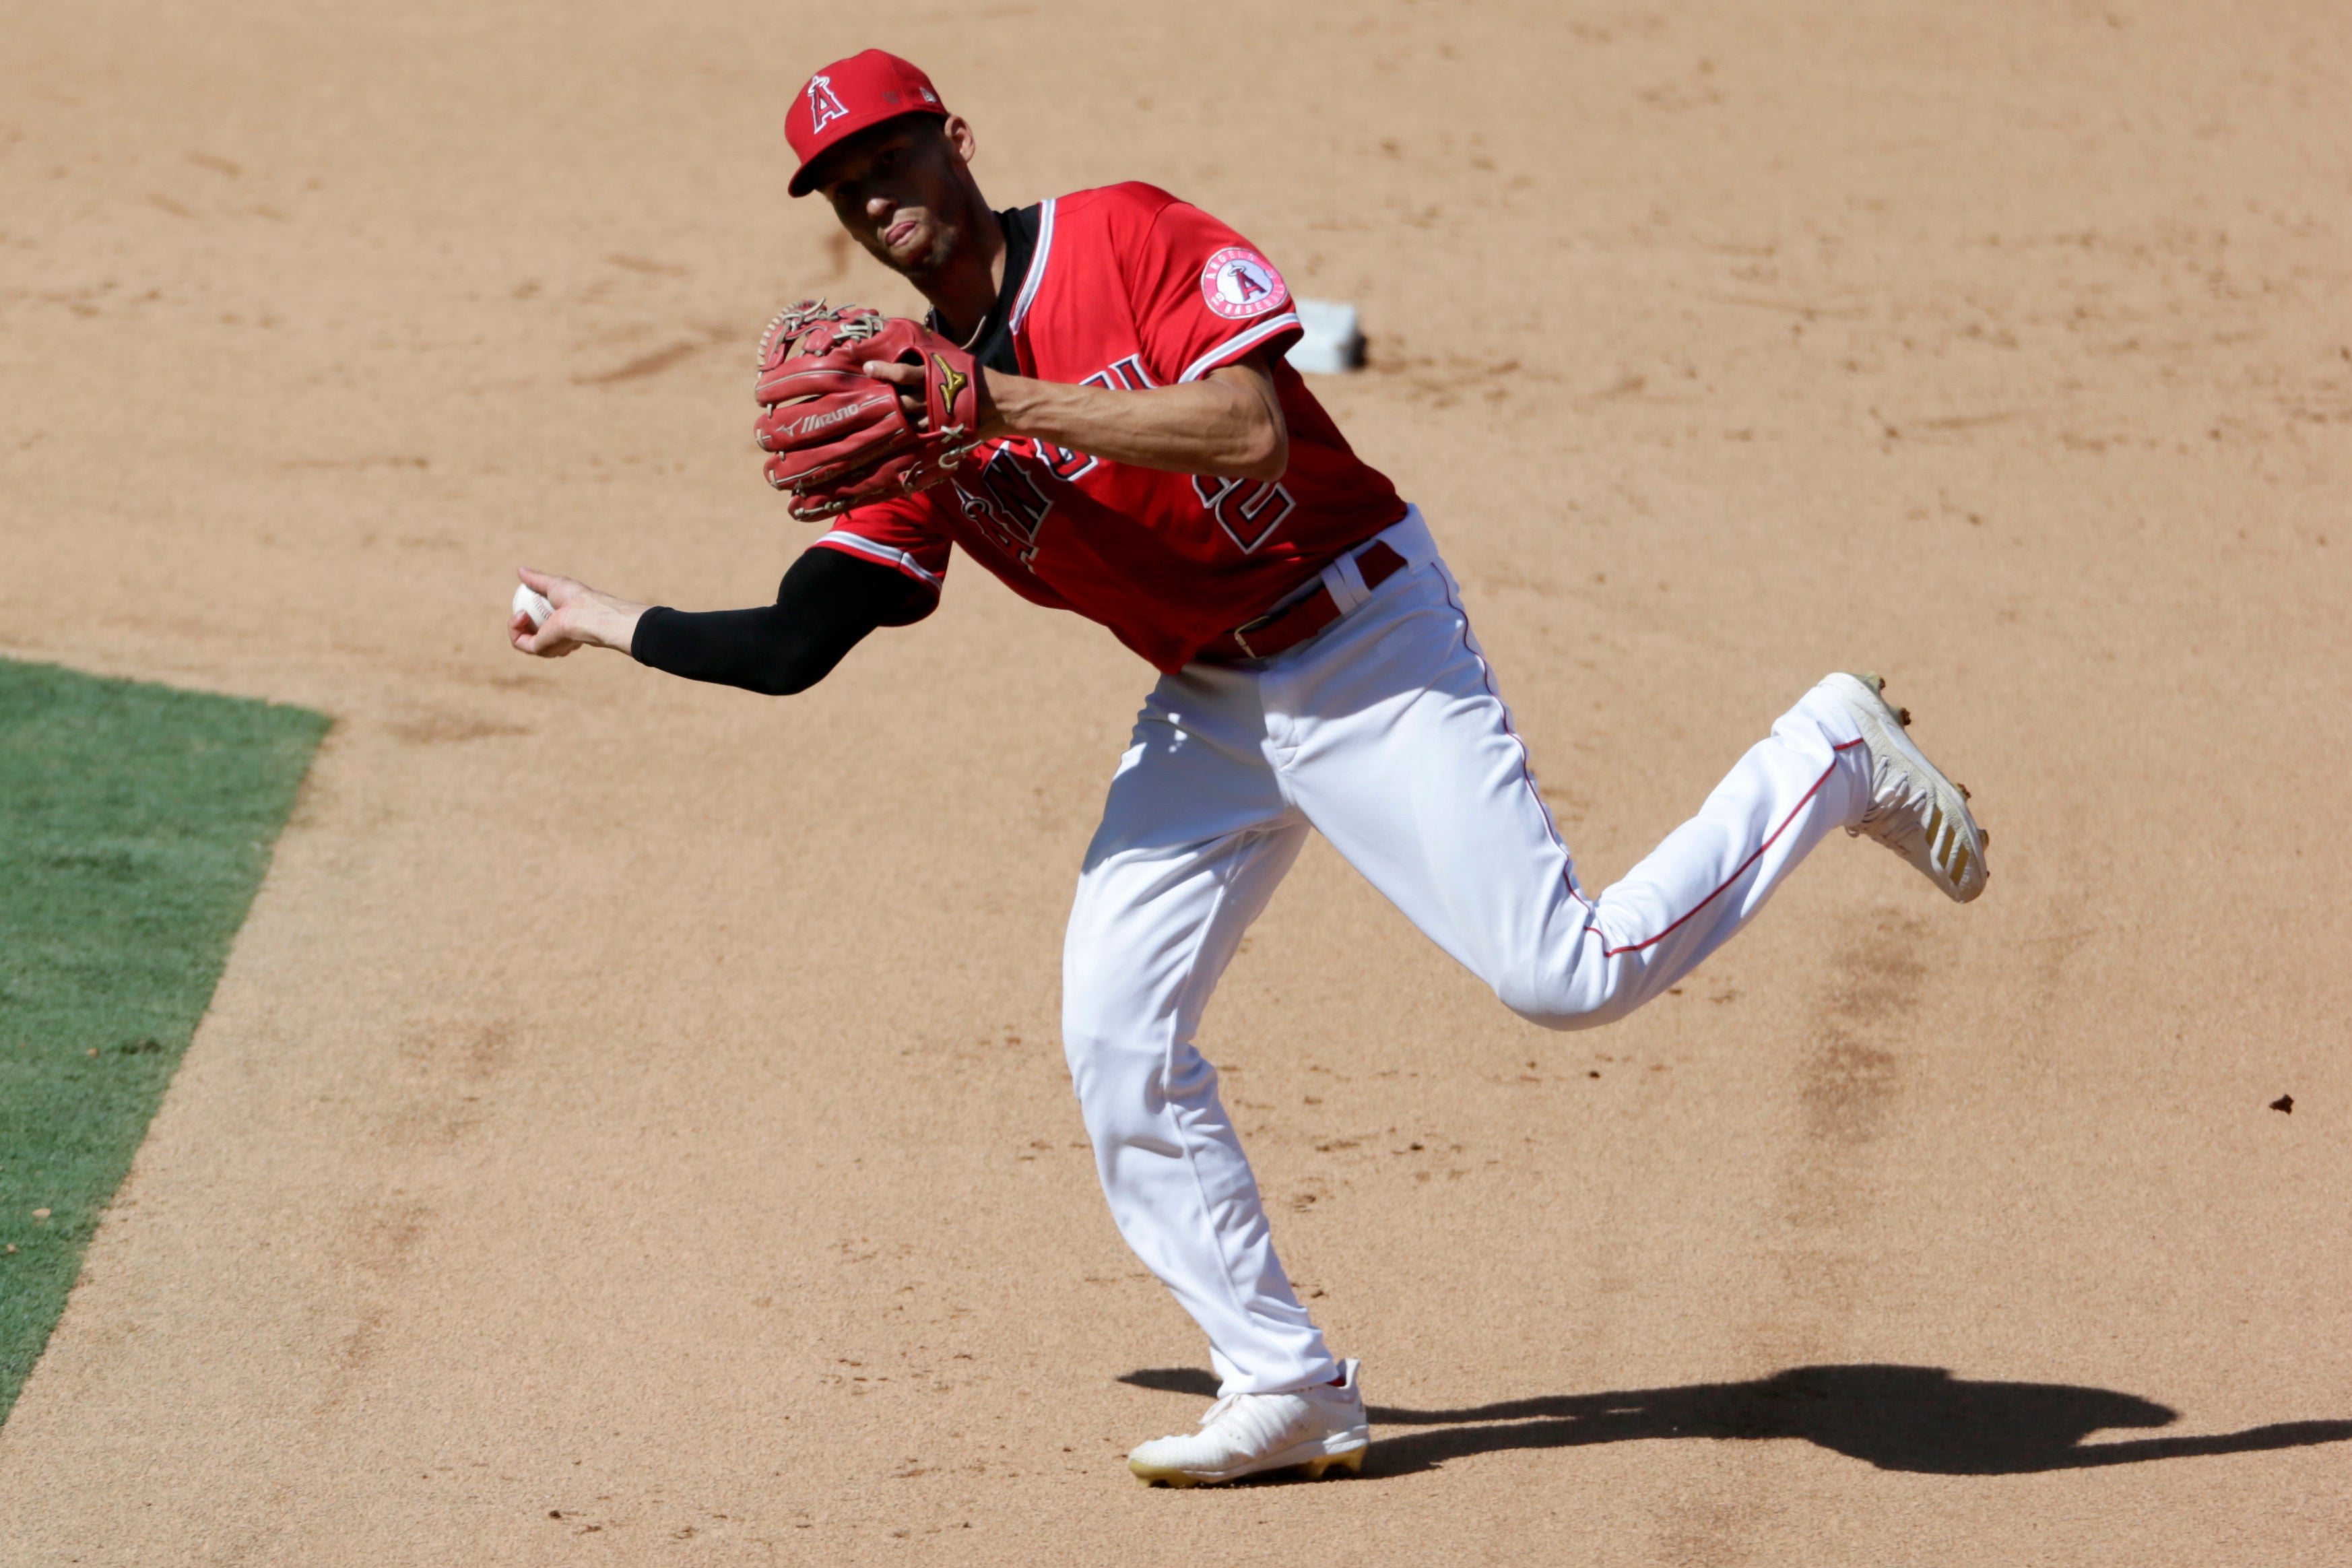 Los Angeles Angels - All you need is glove and the Andrelton